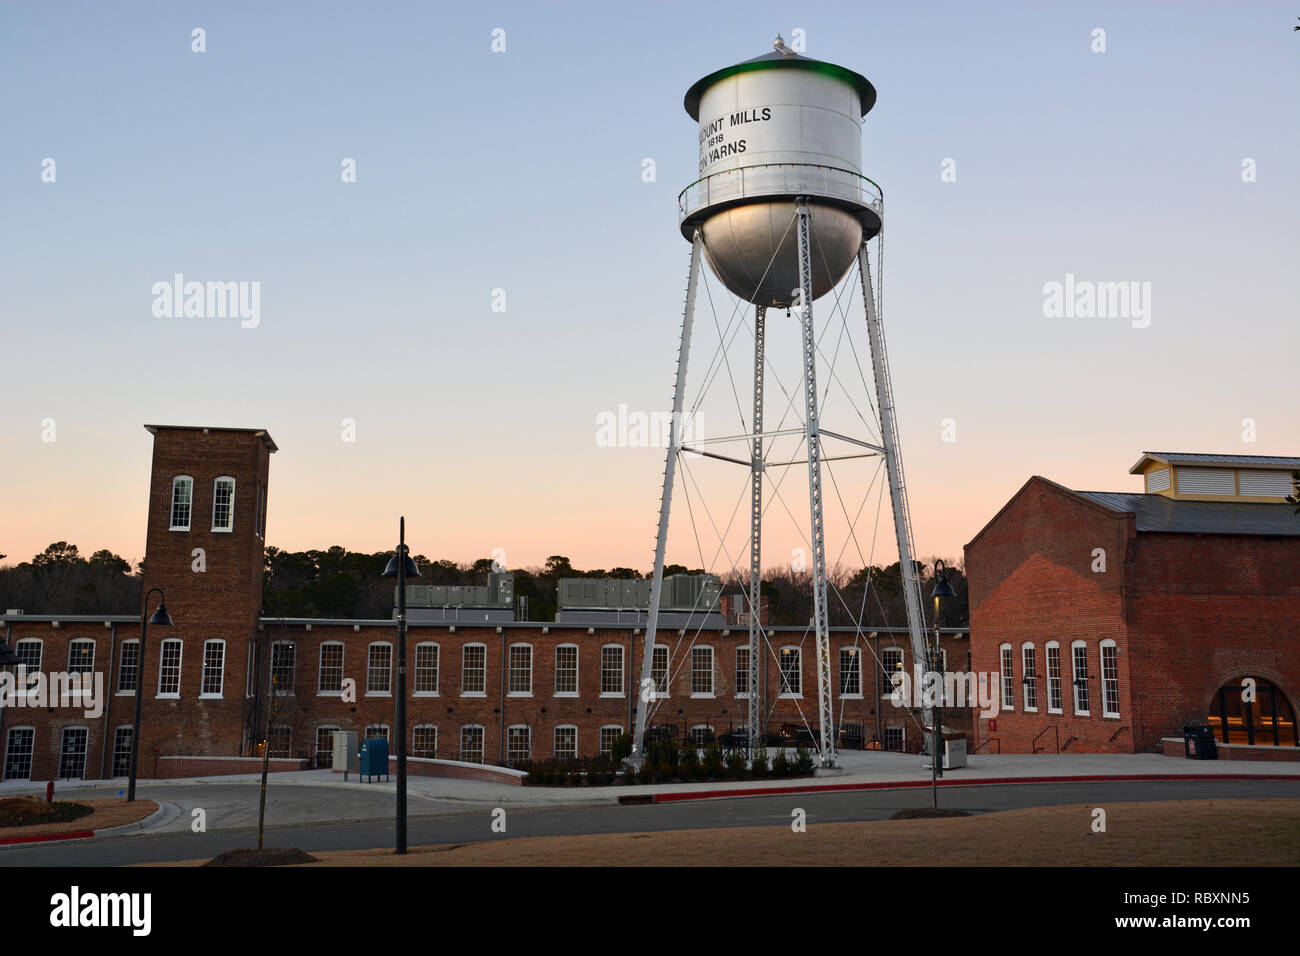 Rocky Mount Mills began as a cotton mill in 1818 and operated till 1996. Today it is converted to residential homes and a micro-brewing incubator. Stock Photo